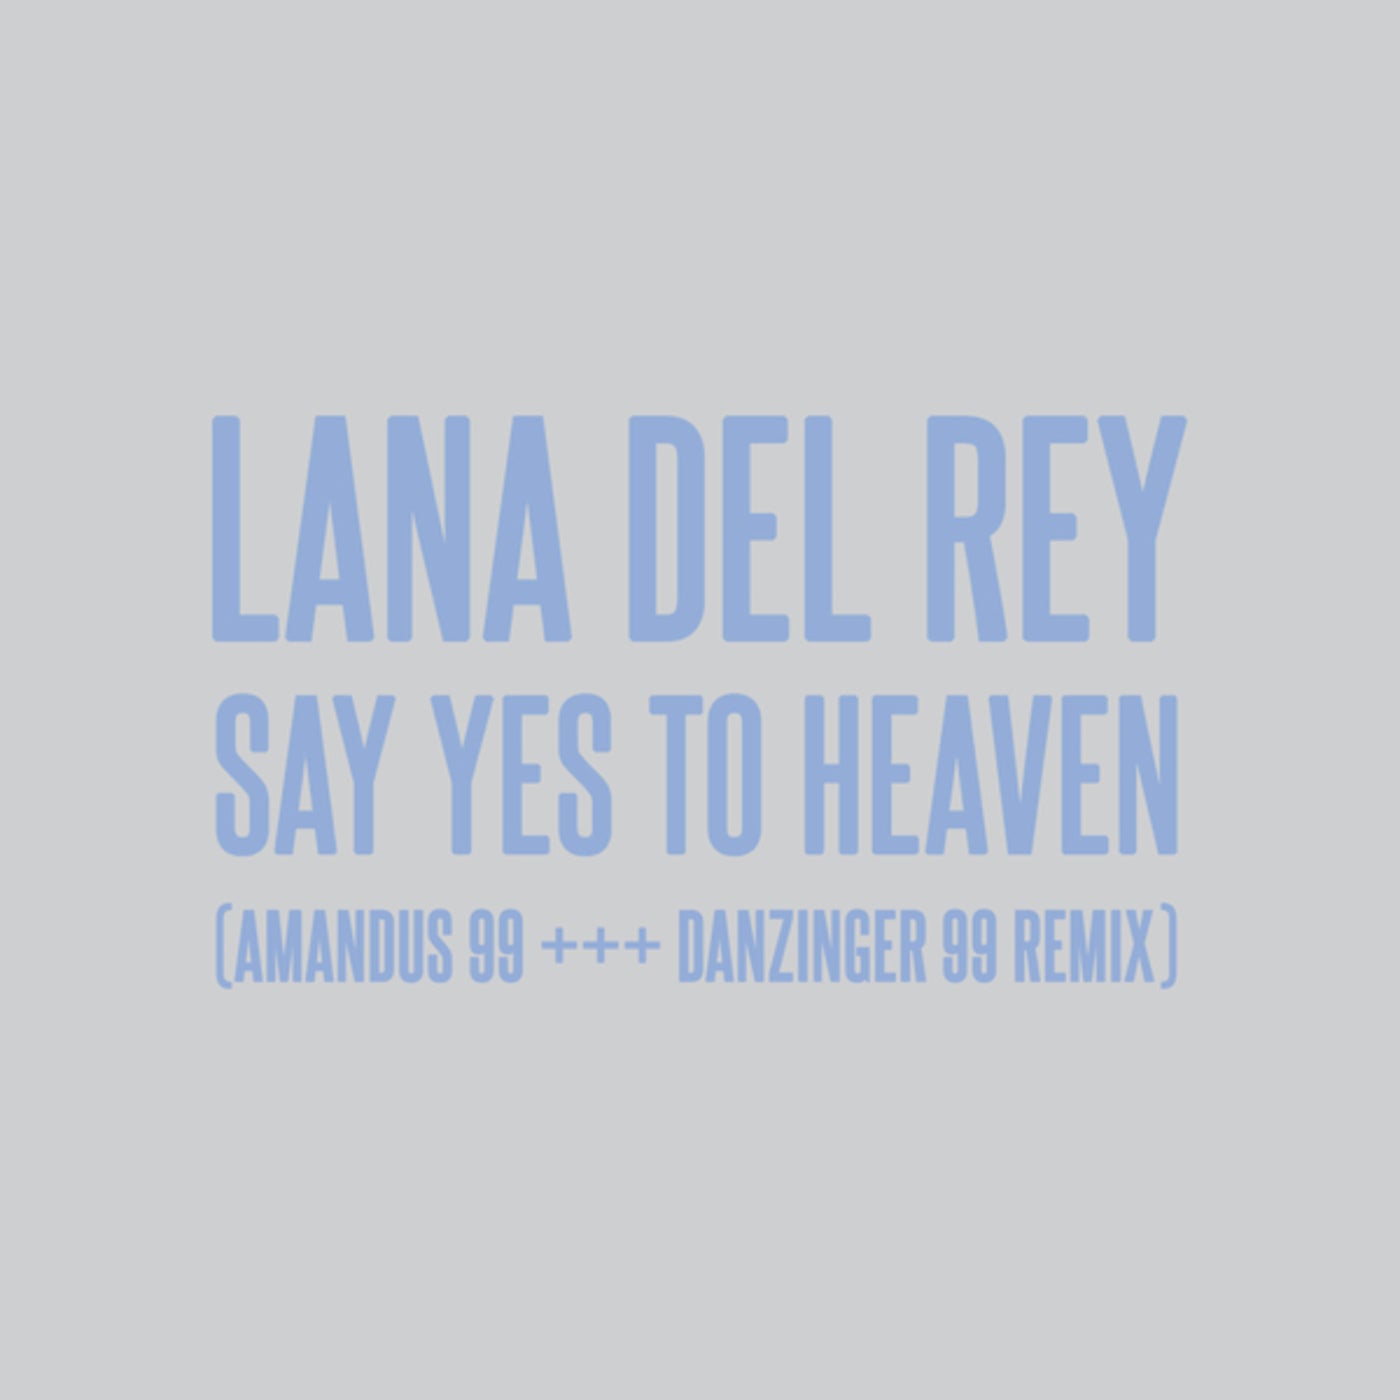 Lana Del Rey - Say Yes To Heaven (Official Audio) 